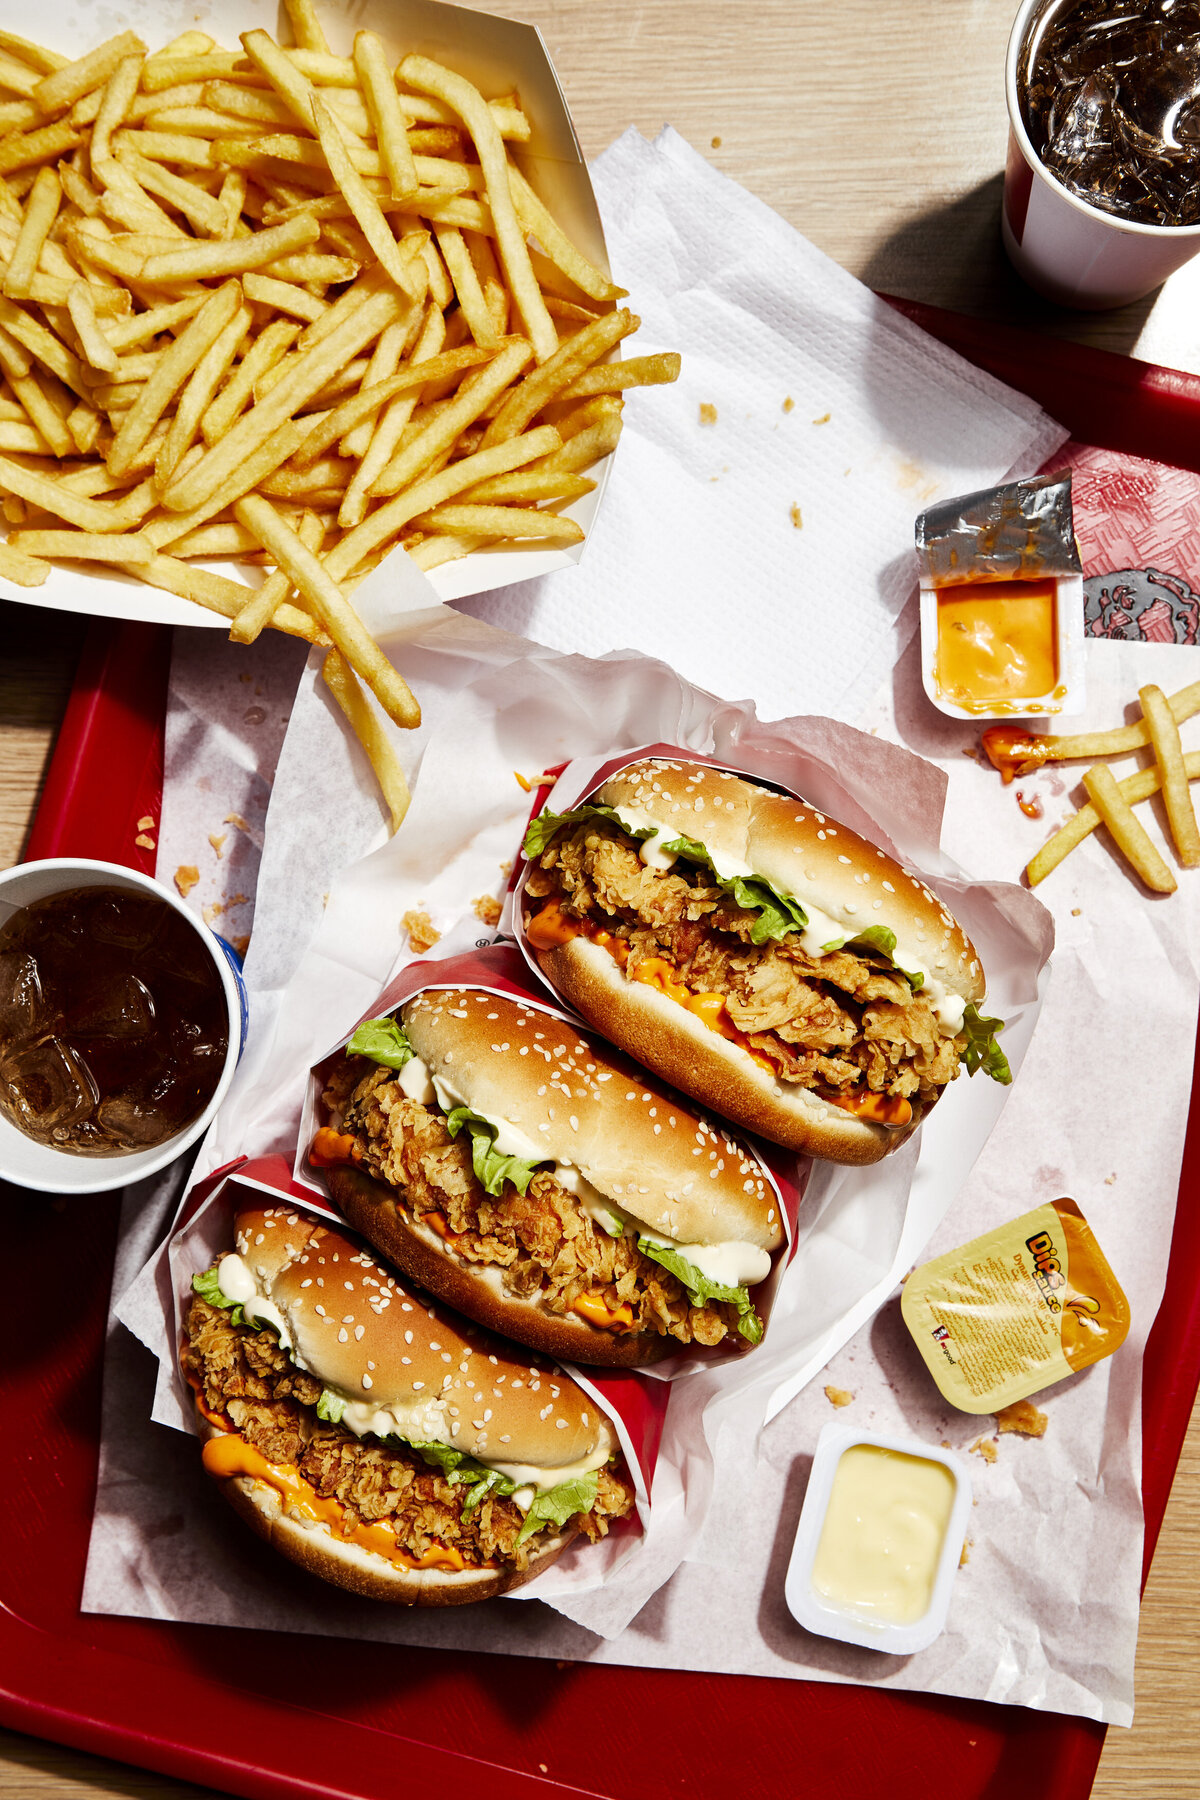 Three chicken sandwiches on a tray with fries, drinks, and dipping sauces.